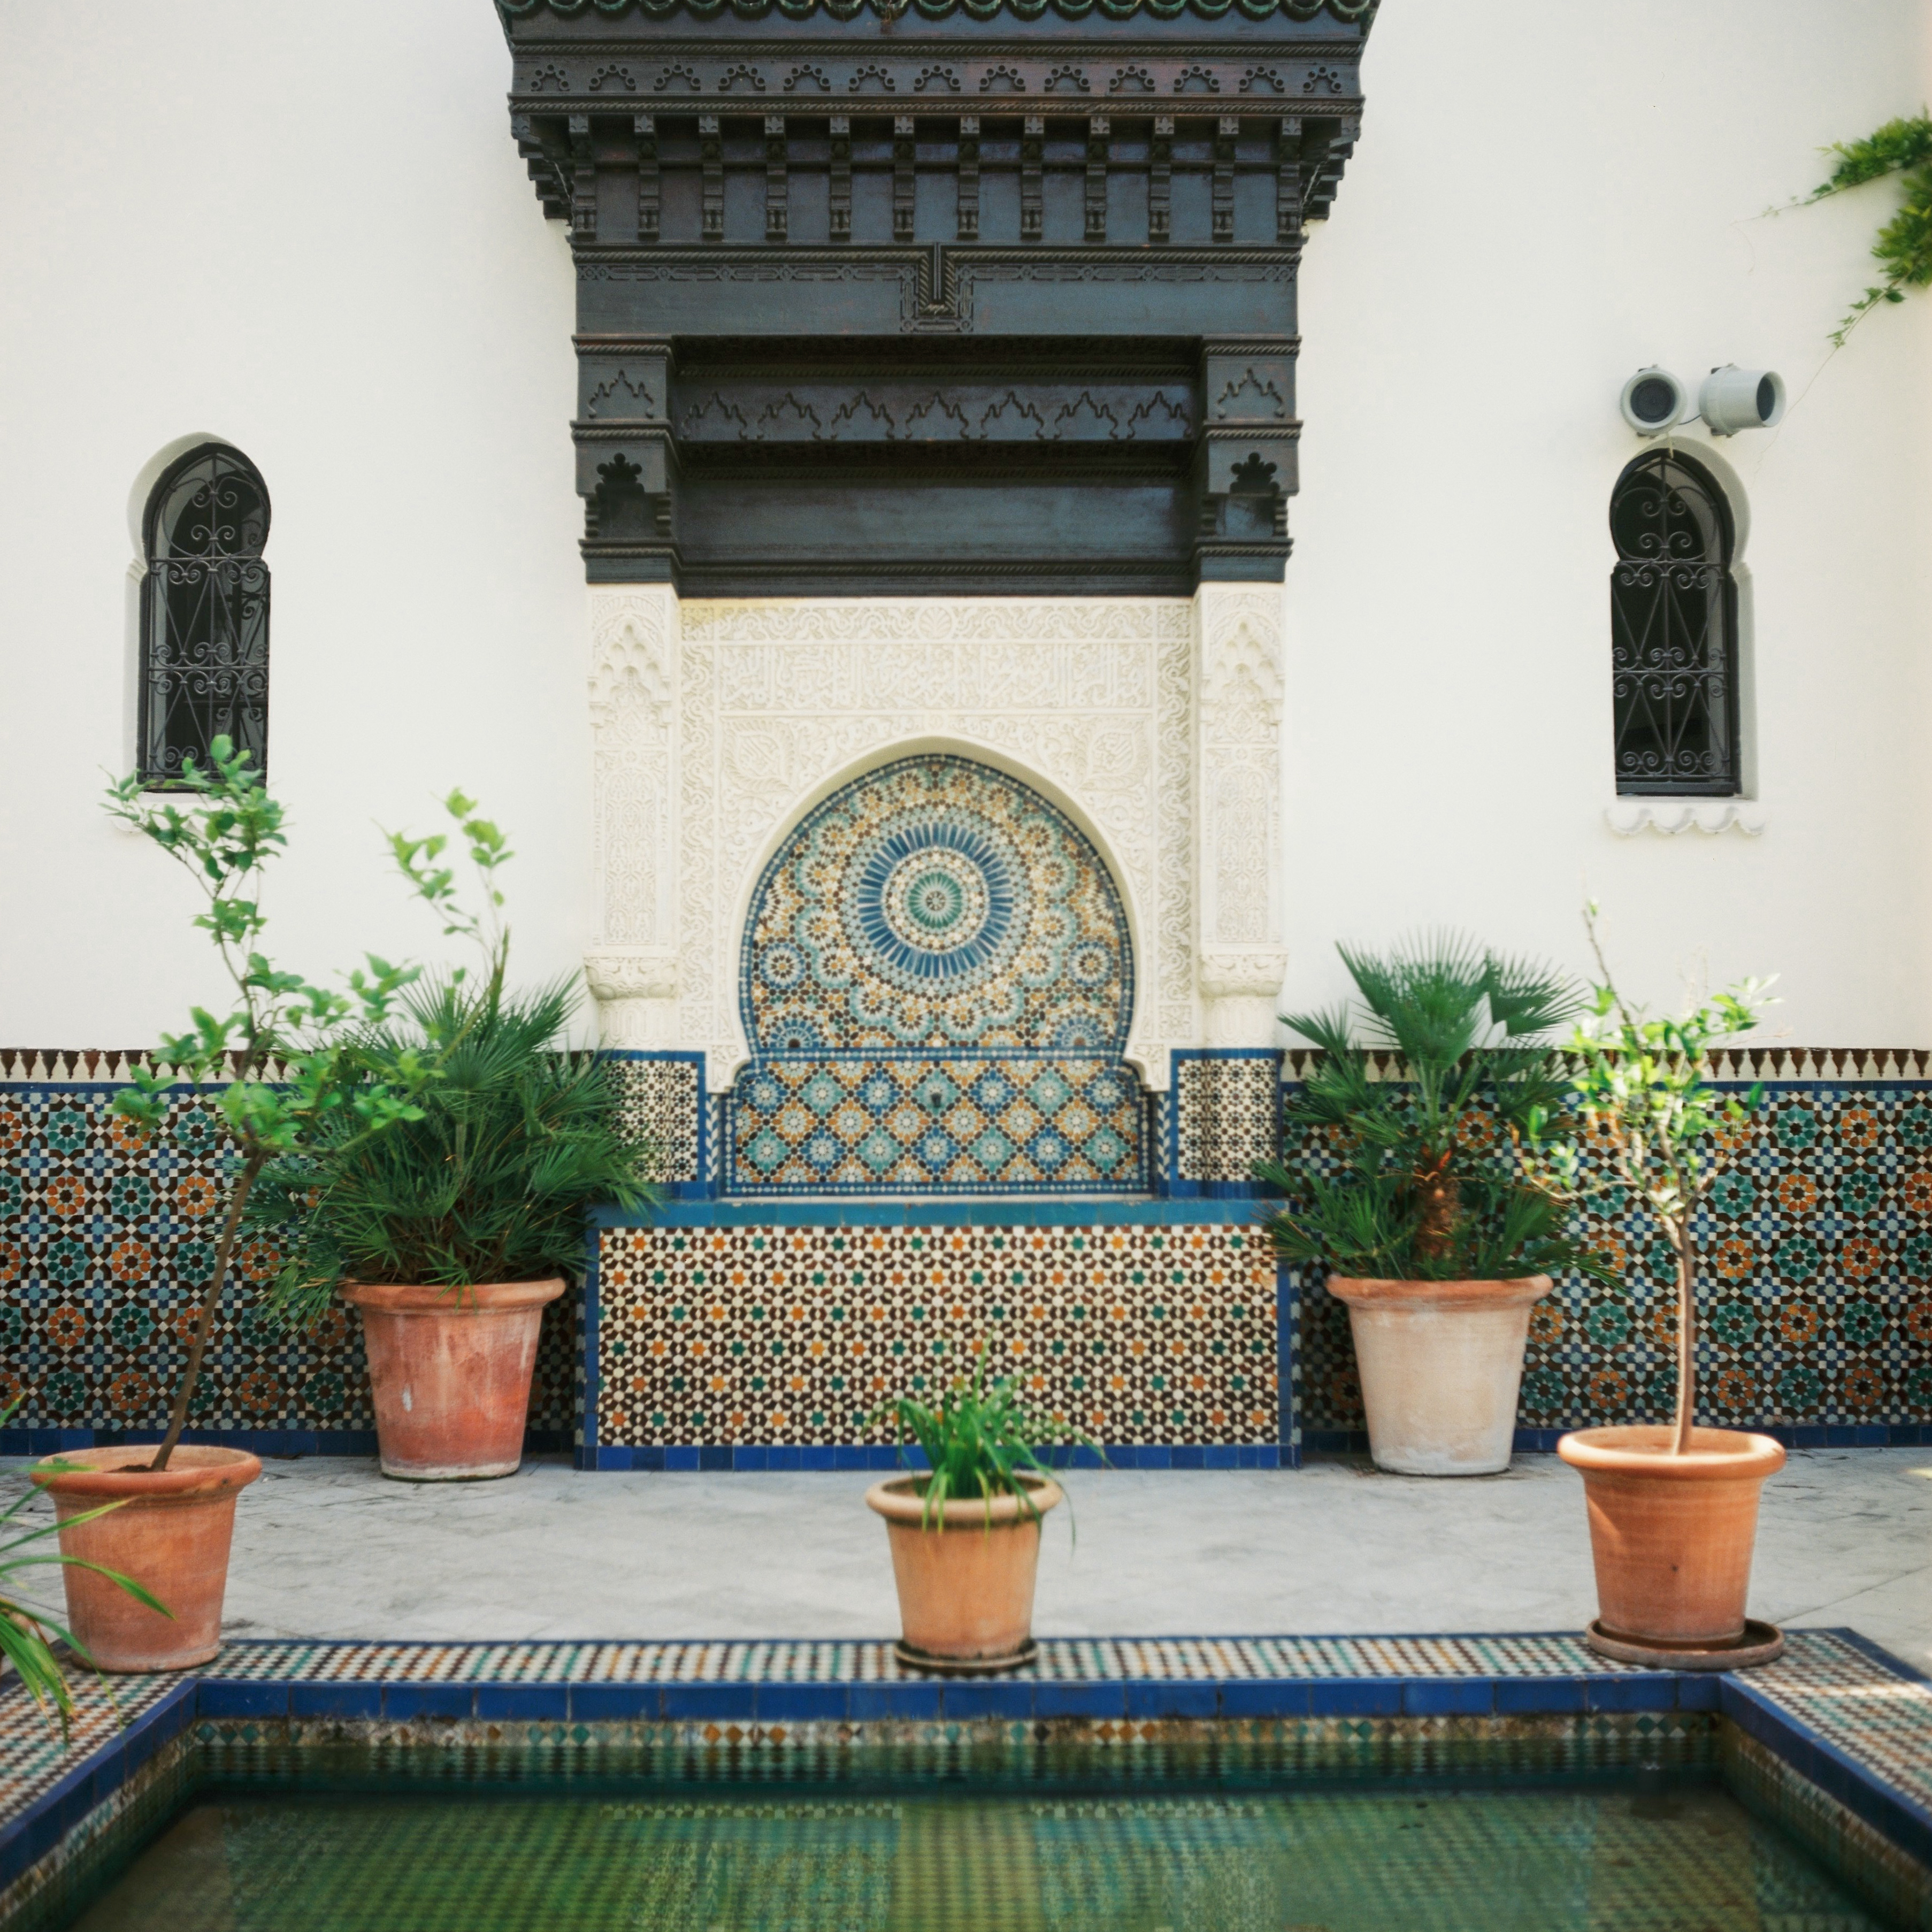 intricate blue and yellow tile mosaics next to a small pool at la grande mosquée de paris